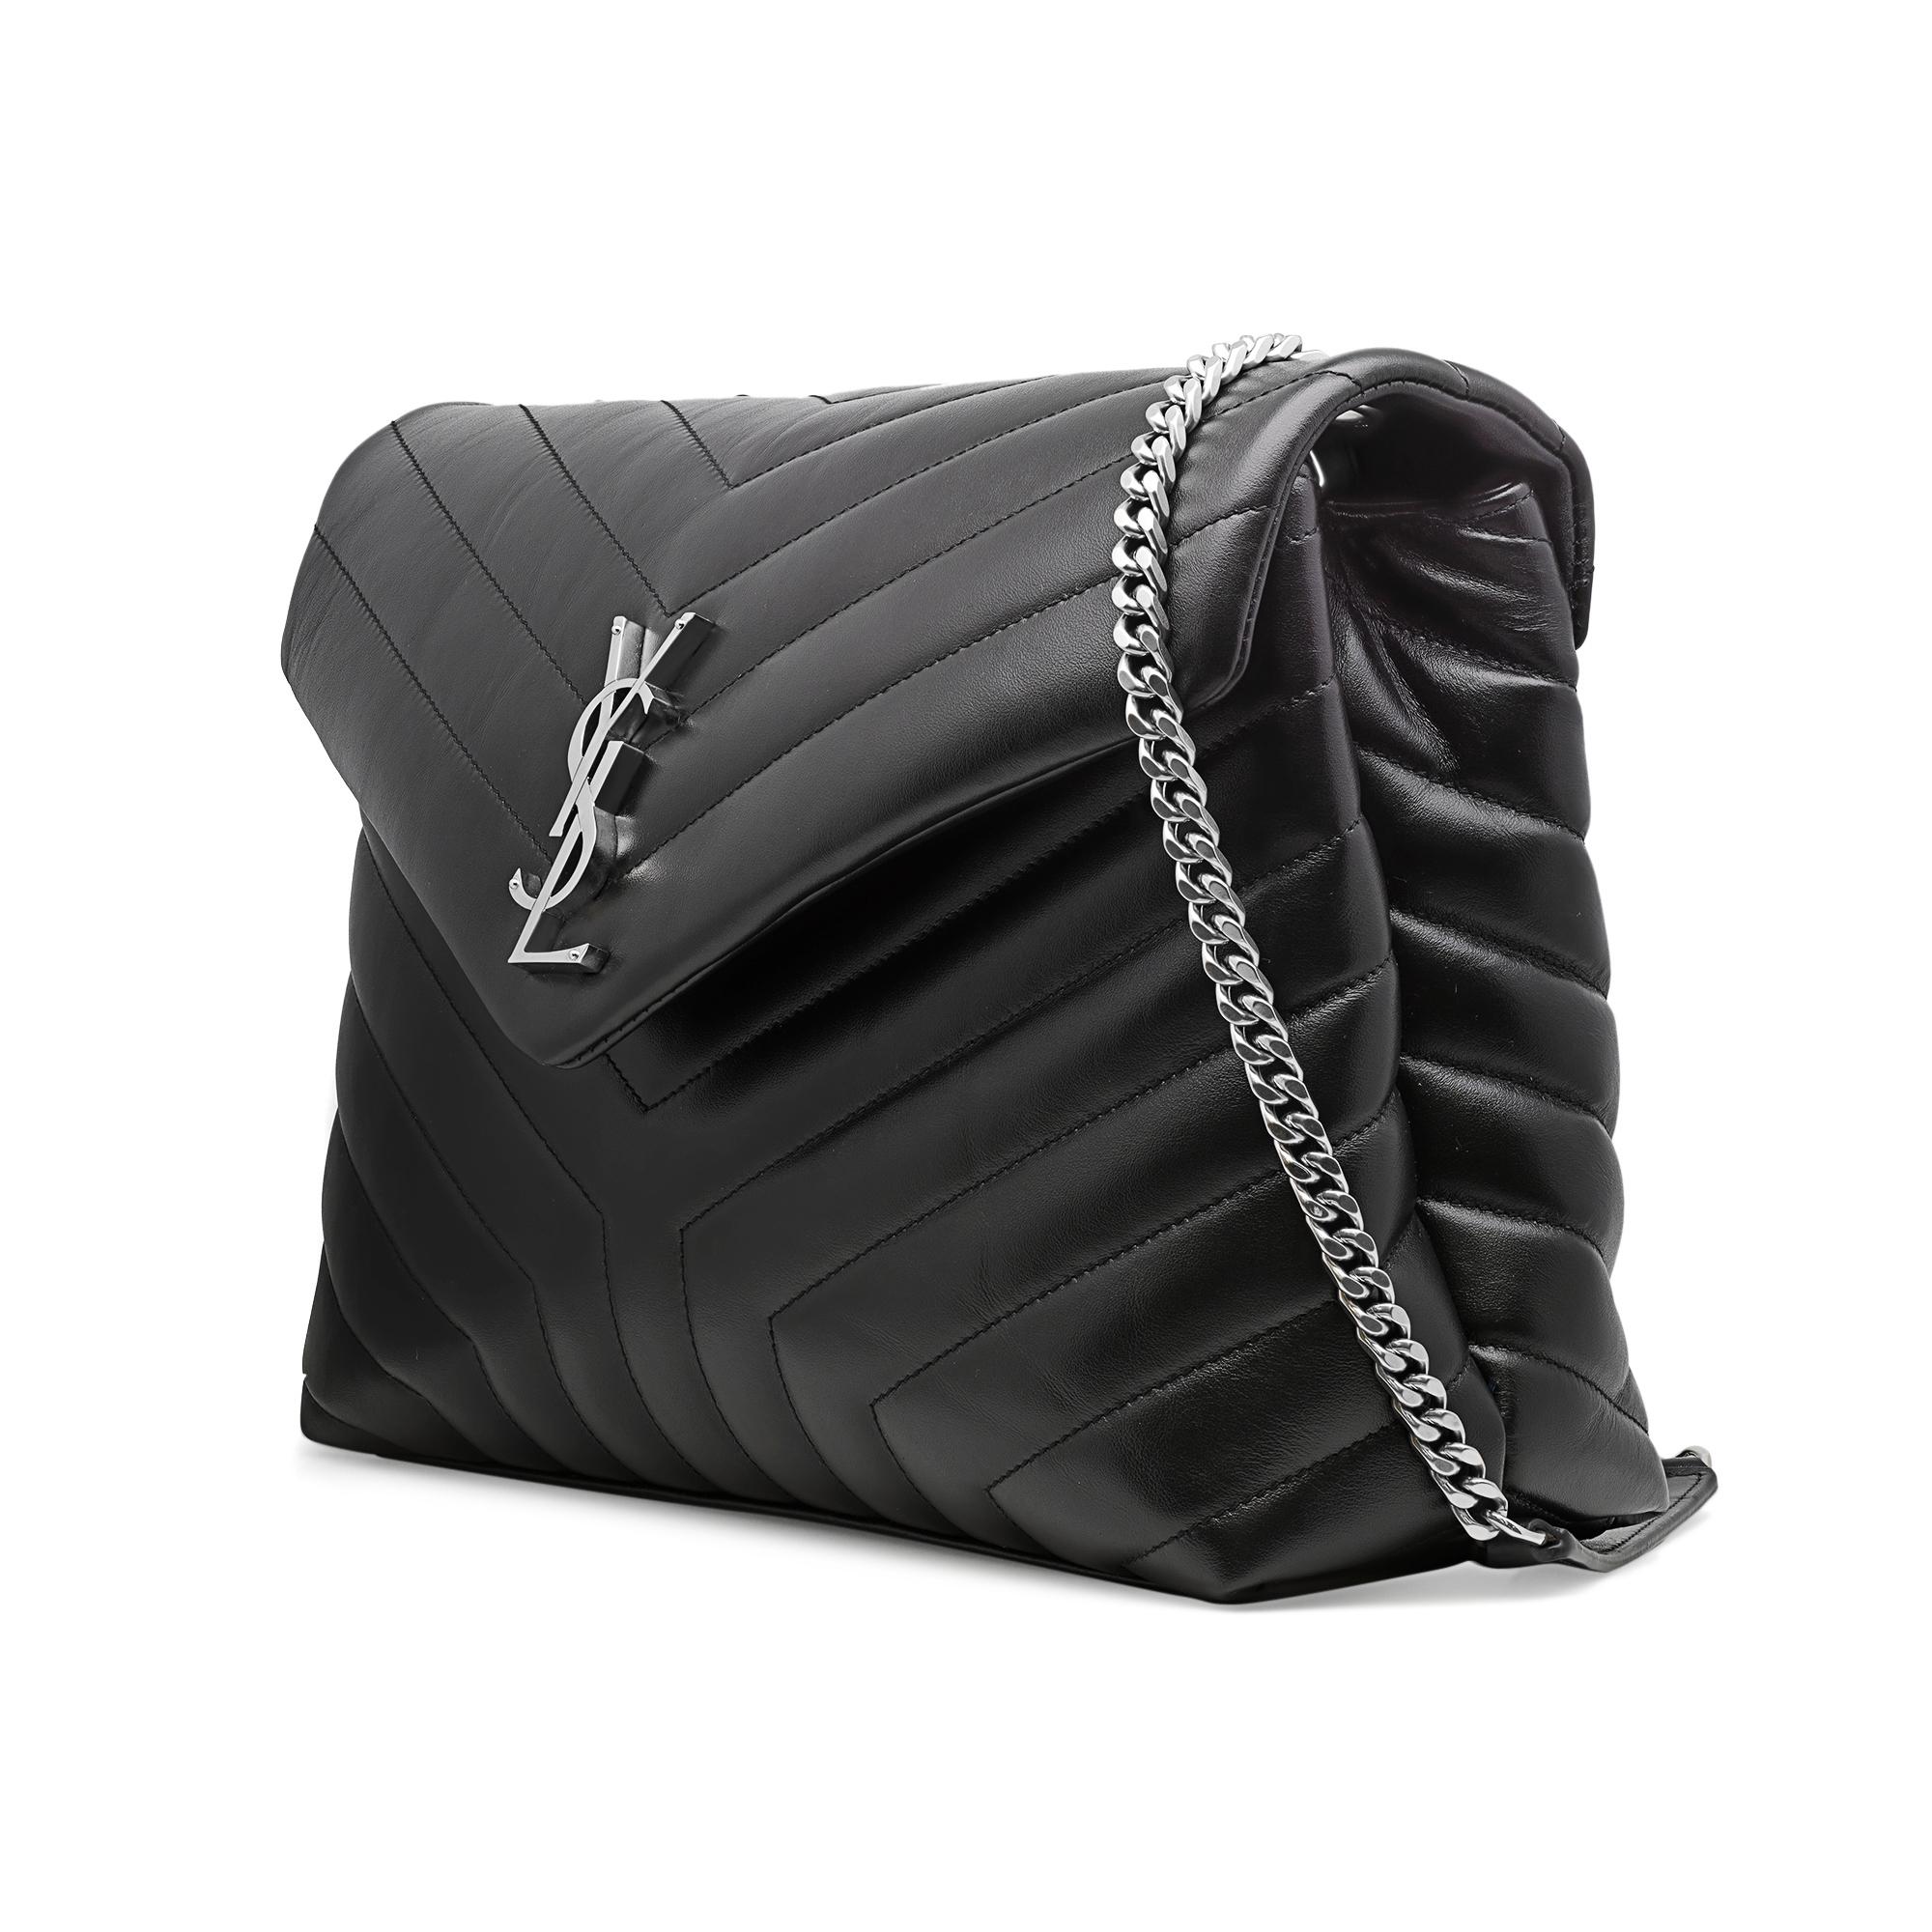 Saint Laurent luxe black quilted leather shoulder bag with adjustable chain straps. Features front flap with interlaced metal YSL initials. Silver tone hardware, quilted finish leather. Magnetic snap closure. Two main interior compartments separated